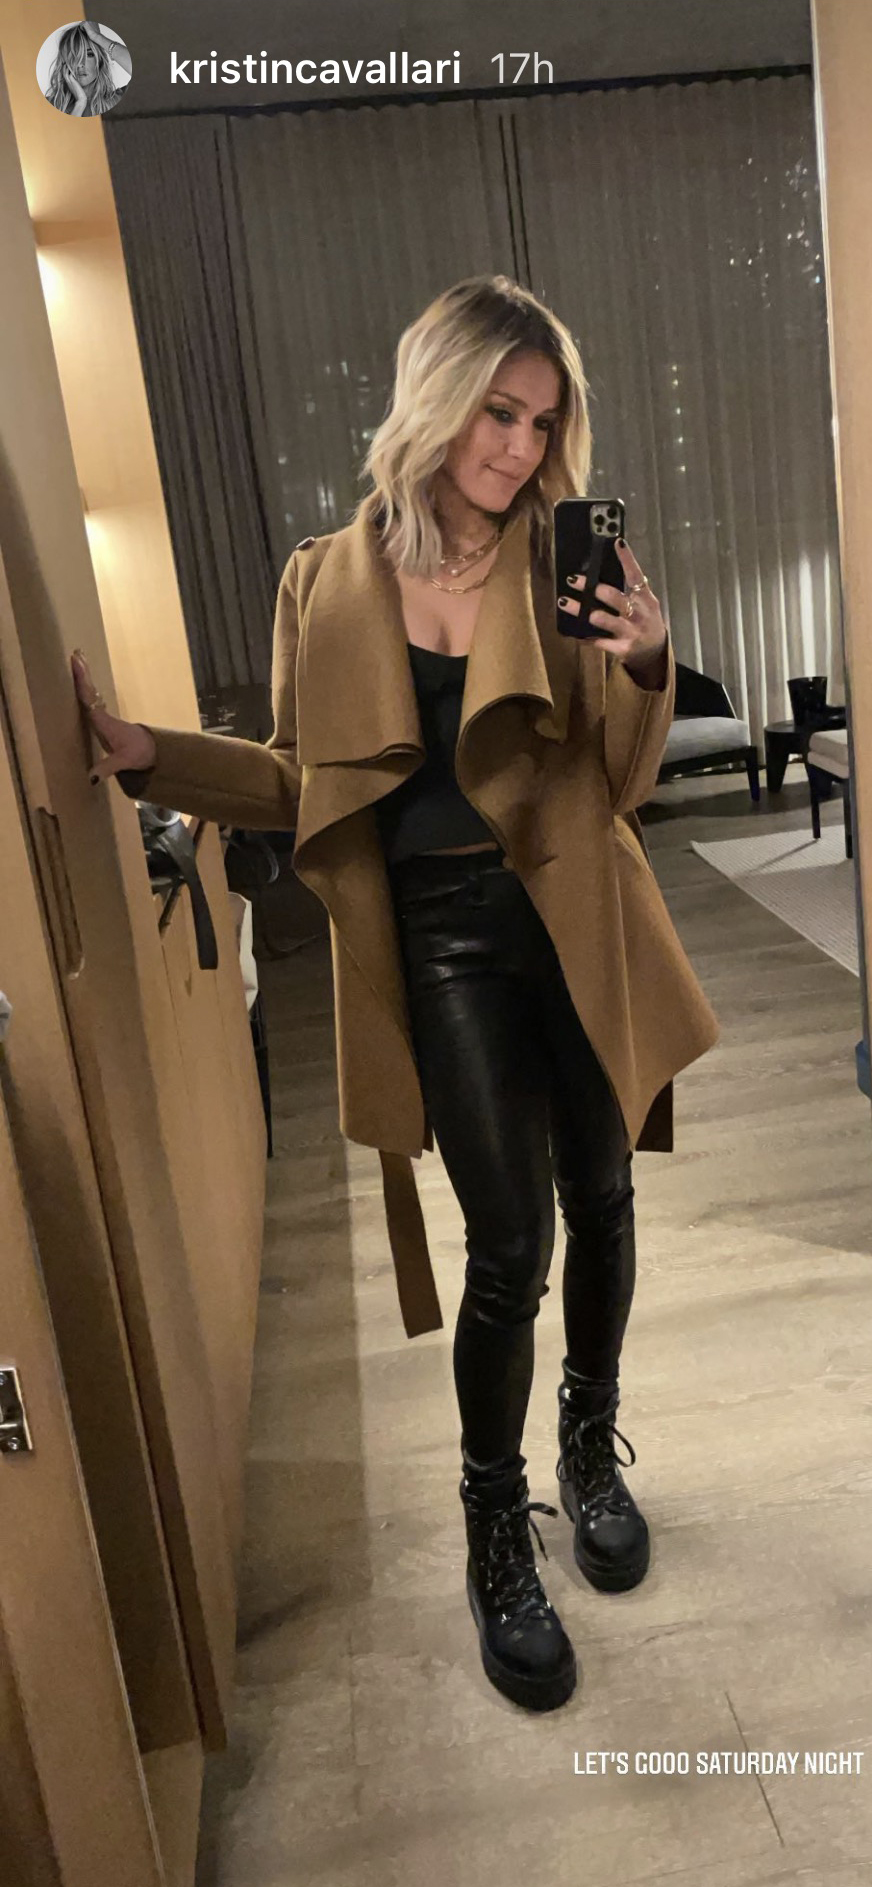 Channel Kristin Cavallari's Winter Style With These Faux Leather Leggings